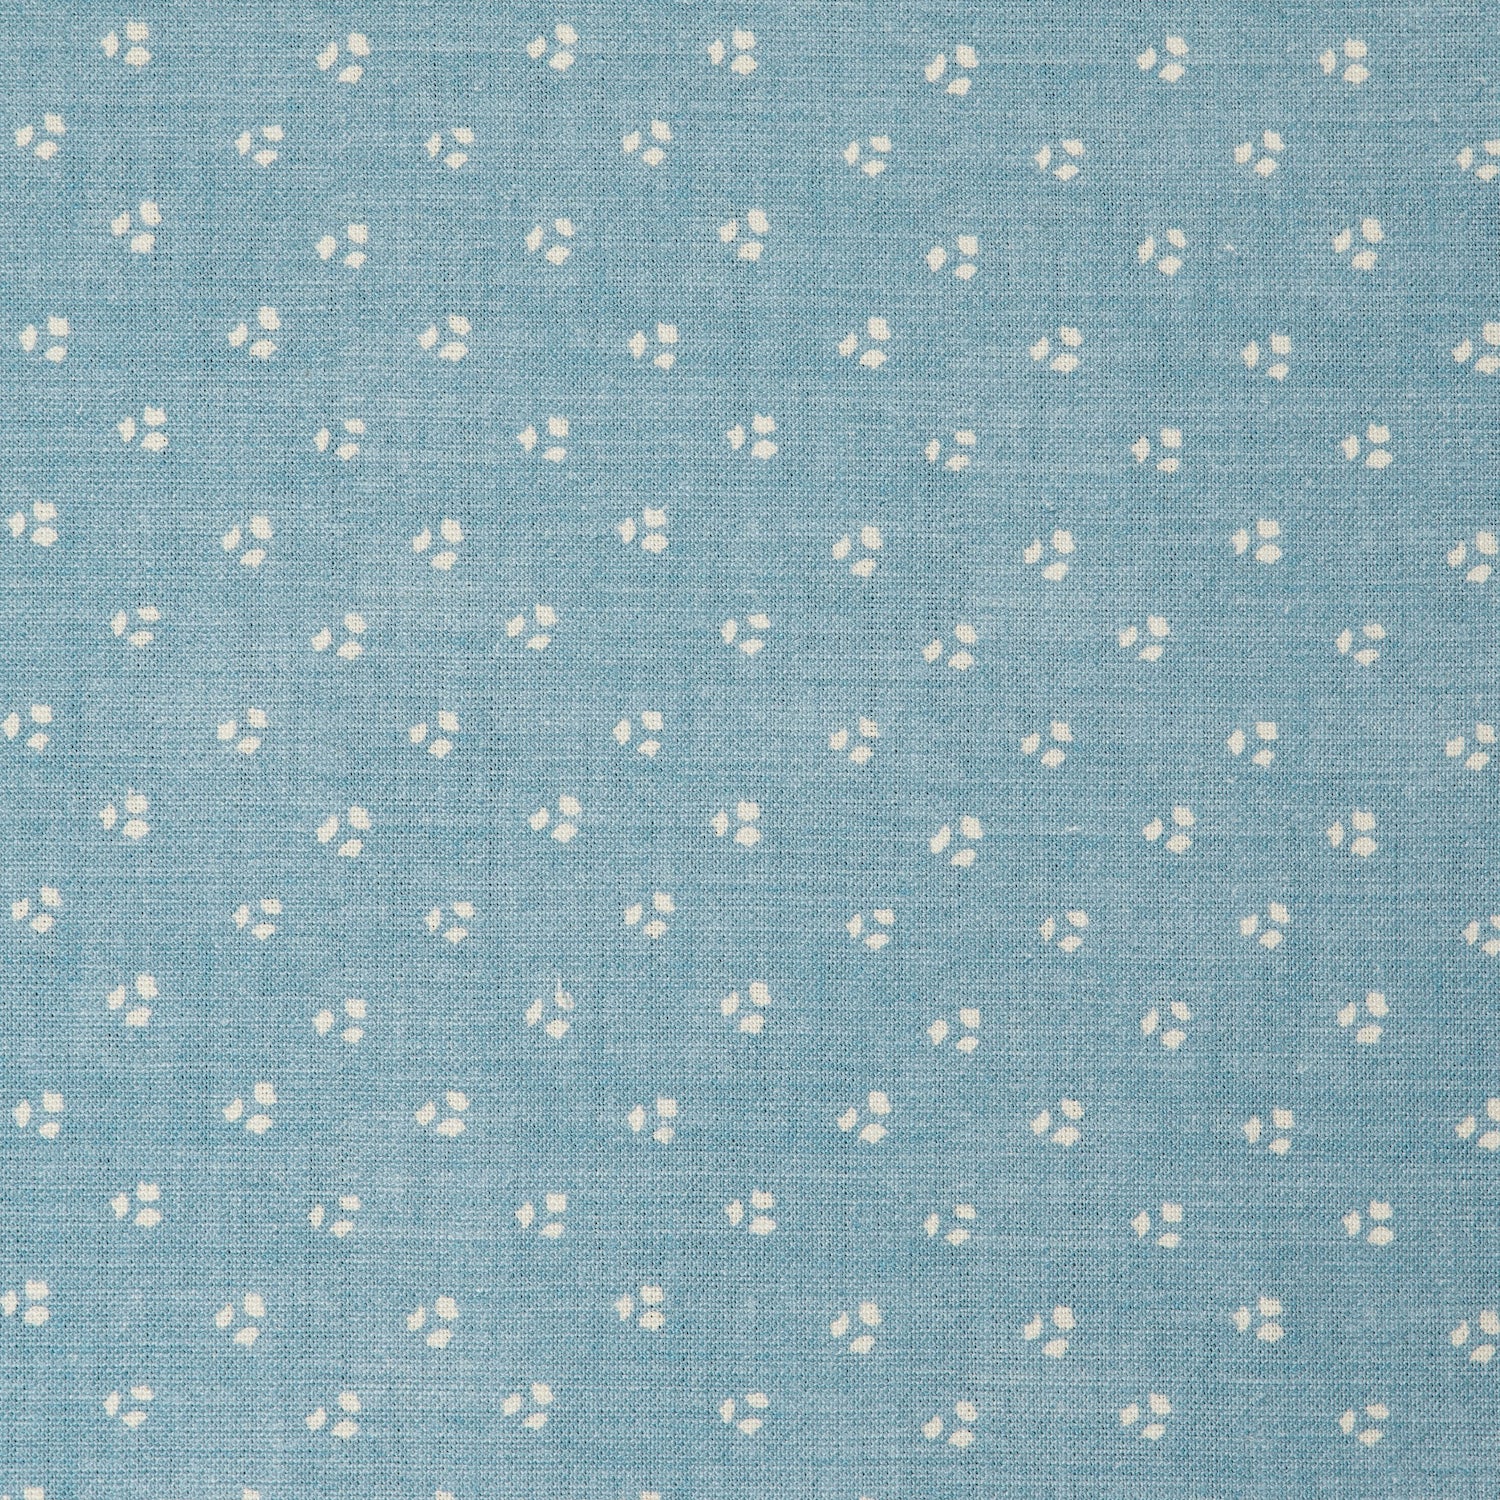 Detail of a linen fabric in a clustered dot pattern in cream on a sky blue field.